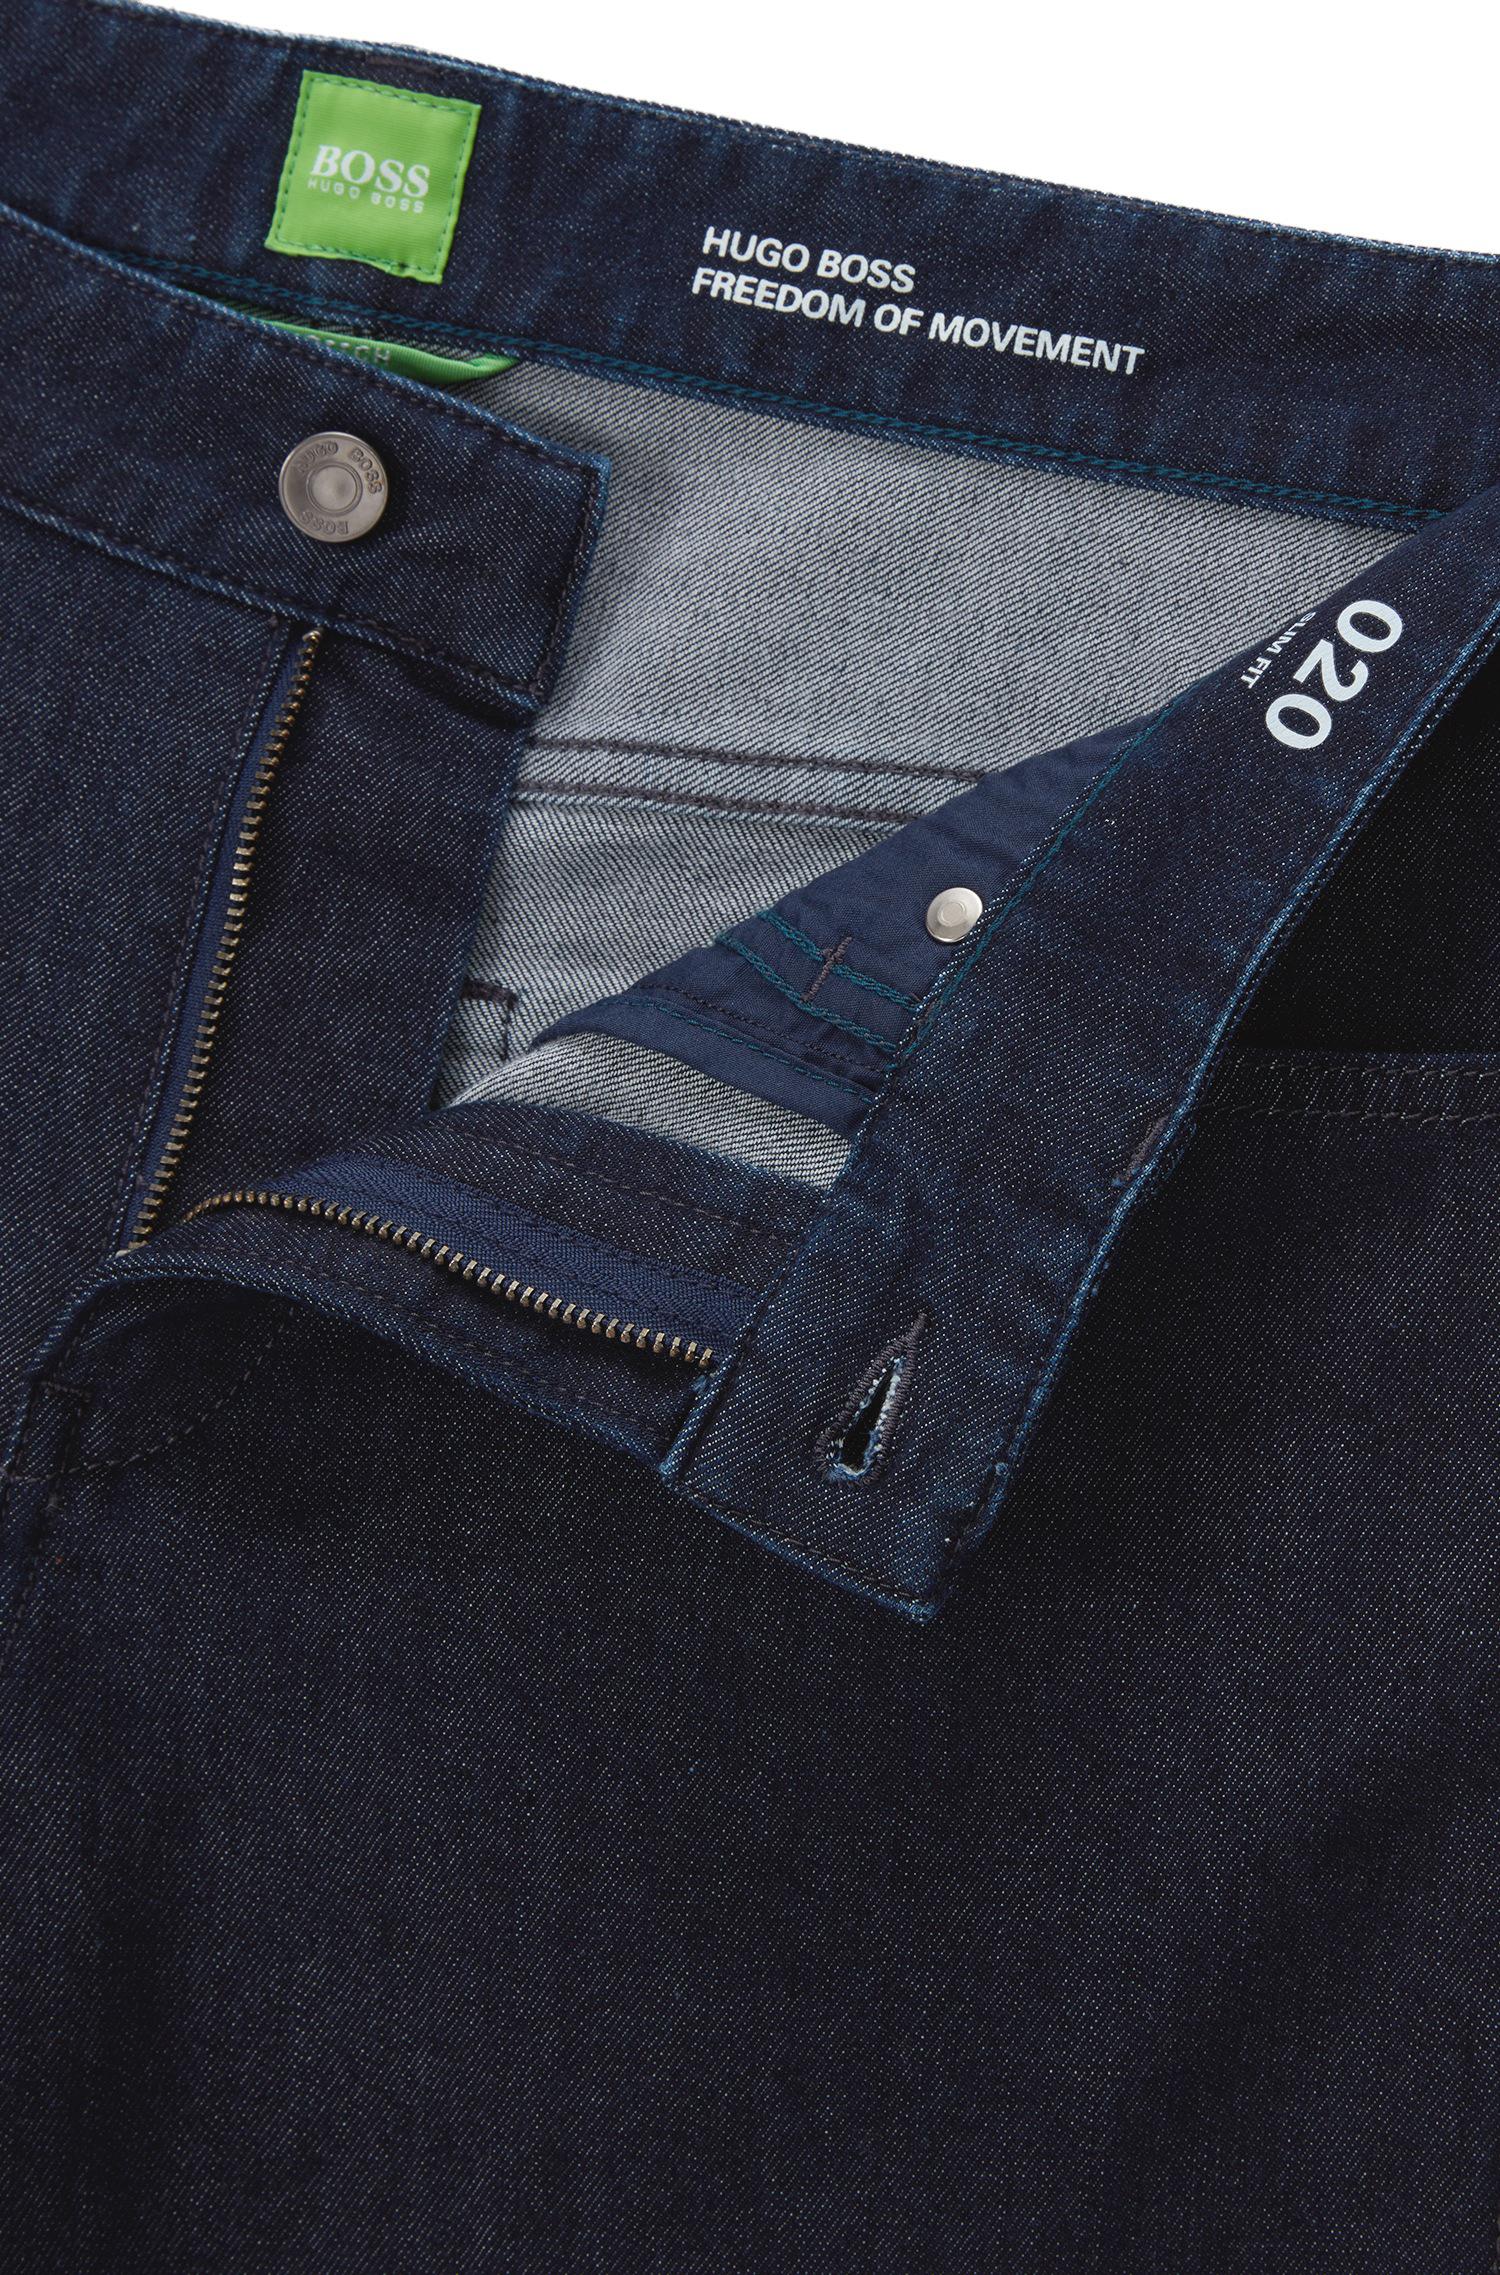 hugo boss green jeans stretch OFF 51% - Online Shopping Site for Fashion &  Lifestyle.